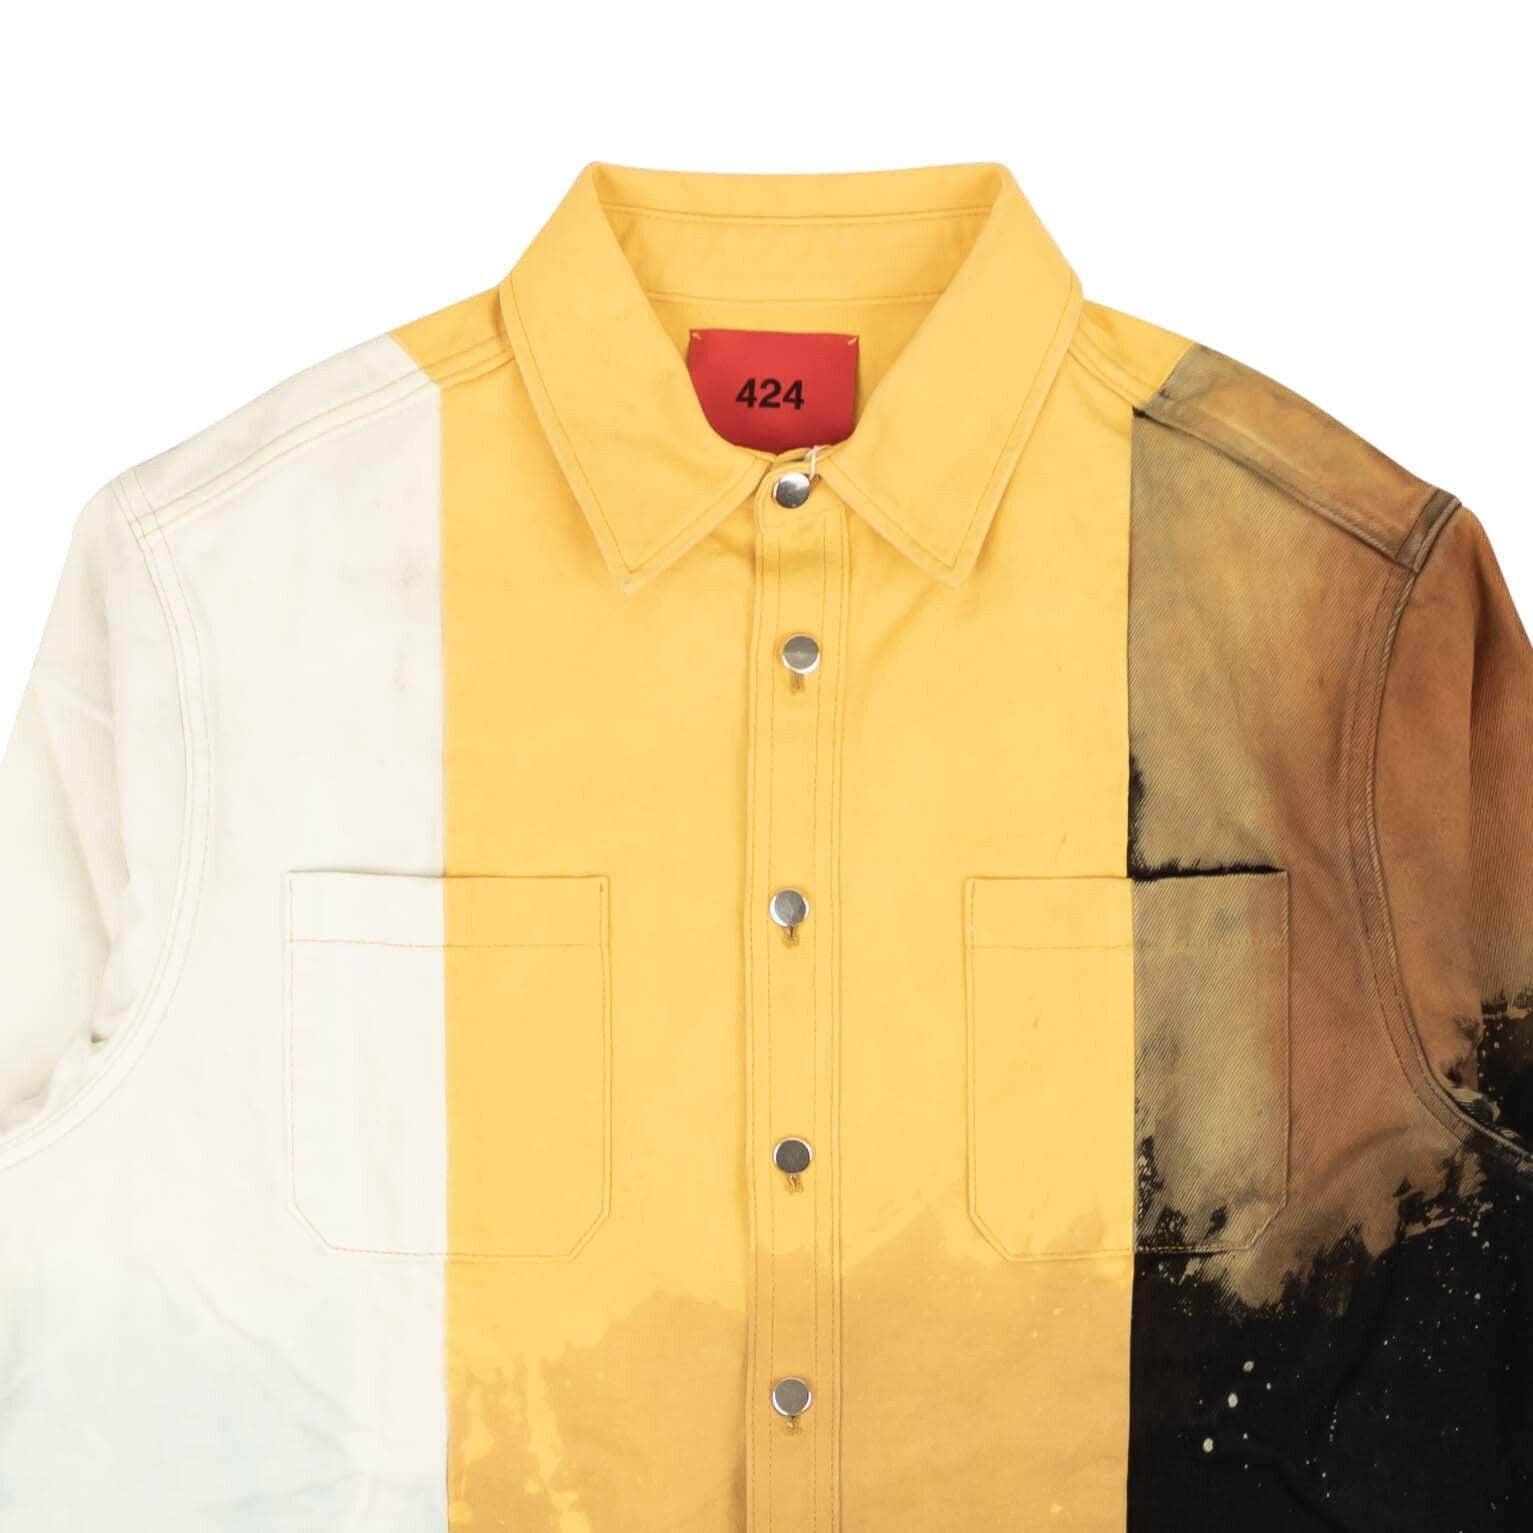 424 ON FAIRFAX 250-500, 424-on-fairfax, channelenable-all, chicmi, couponcollection, gender-mens, main-clothing, mens-shoes, size-m, size-s, size-xs Multi Colorblock Denim BUtton Down Shirt